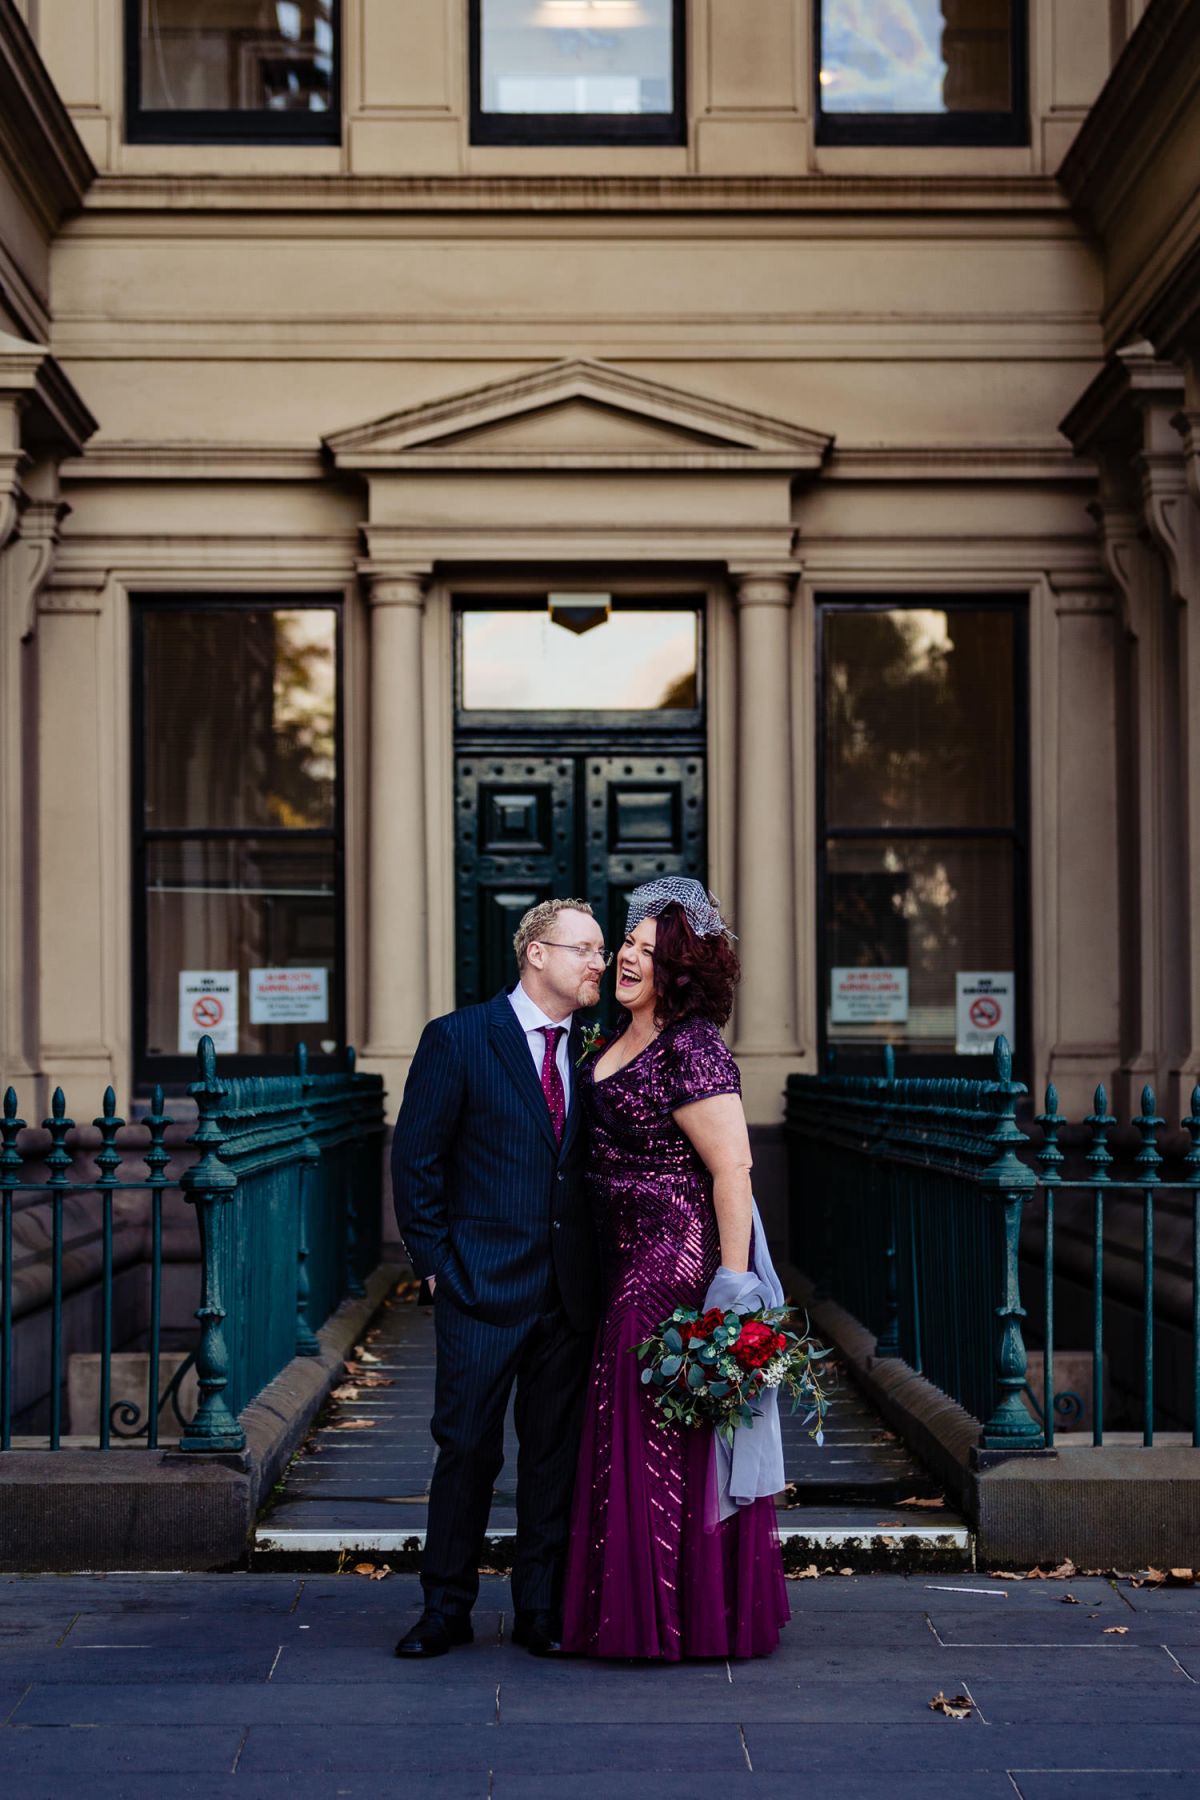 melbourne city locations to elope